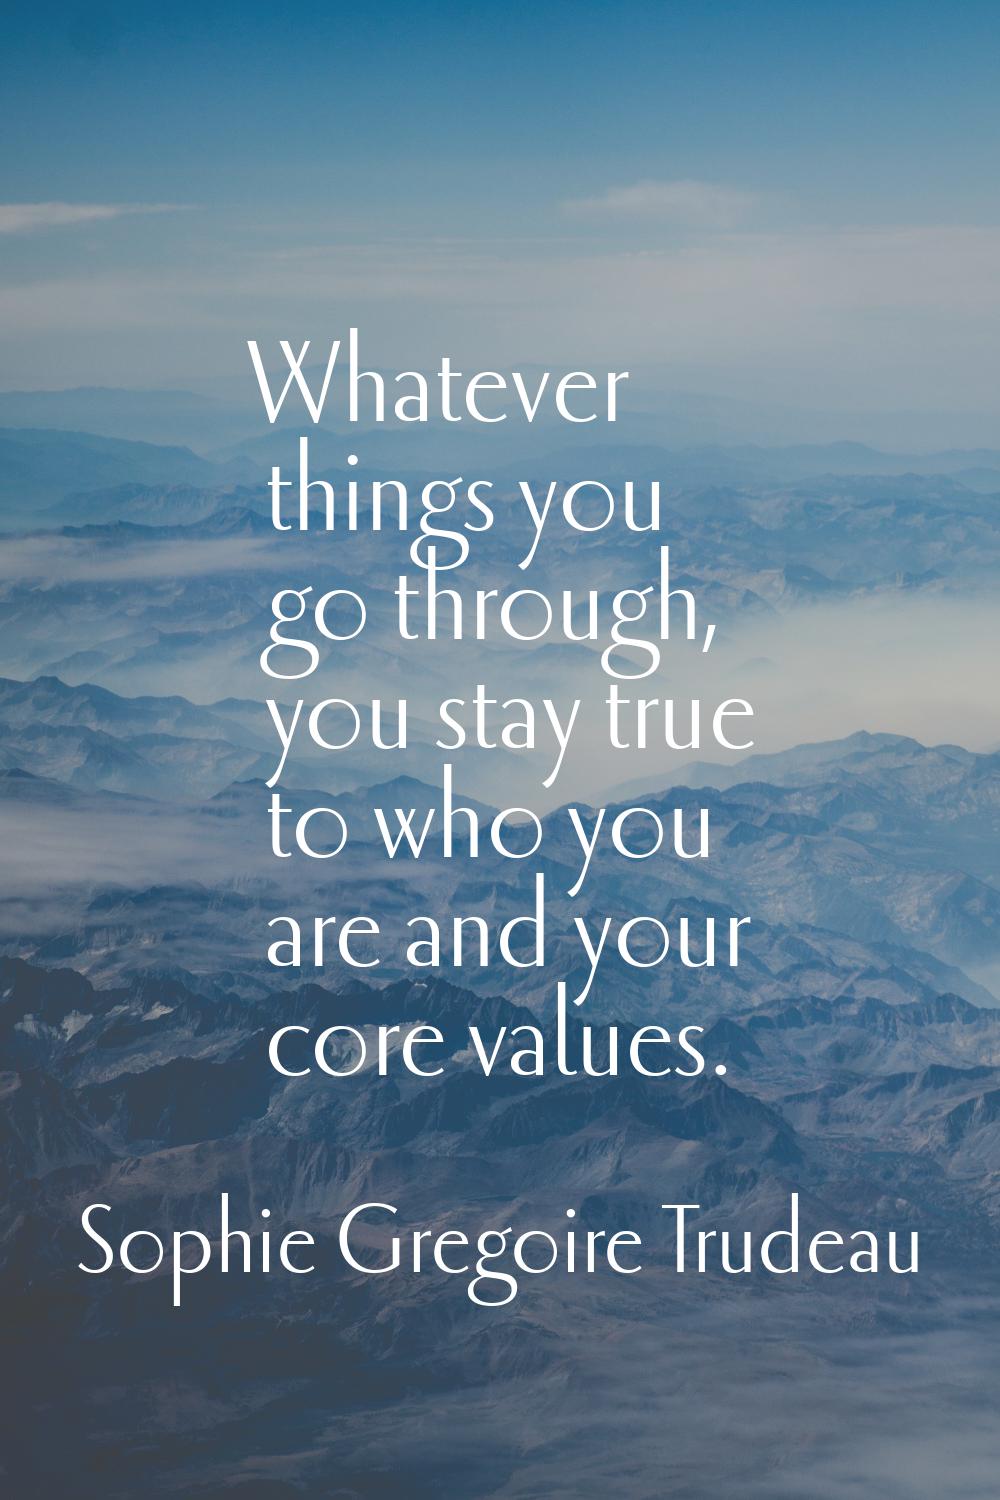 Whatever things you go through, you stay true to who you are and your core values.